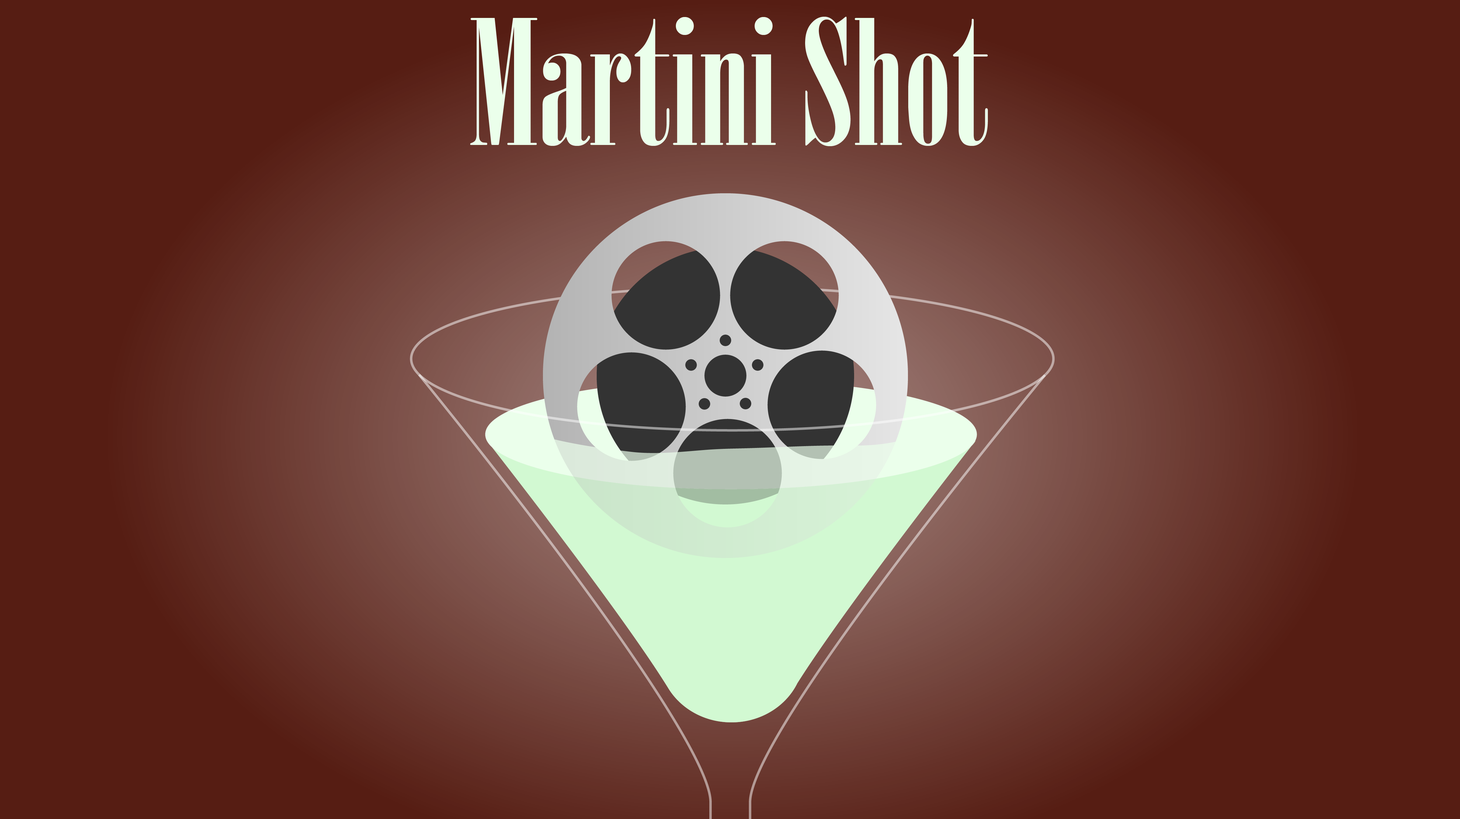 This is Rob Long and on today’s Martini Shot I talk about what happened when my tailor died and his shop was rebooted and remodeled and was better in almost every way except one: it was missing something, like a lot of reboots.